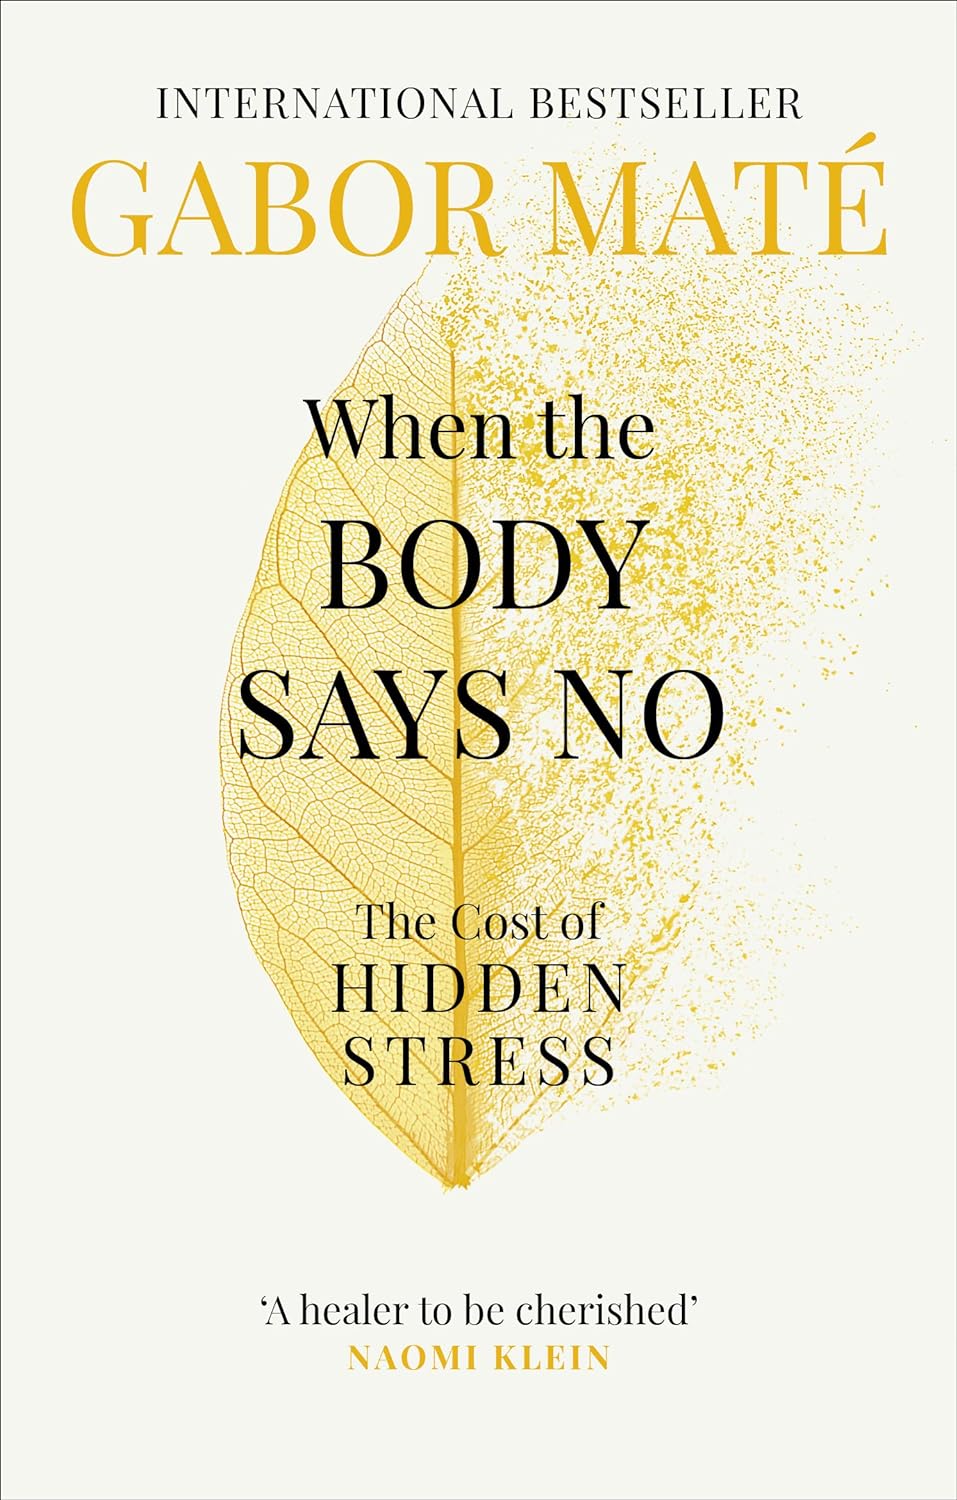 Book Cover - When the Body Says No by Gabor Mate